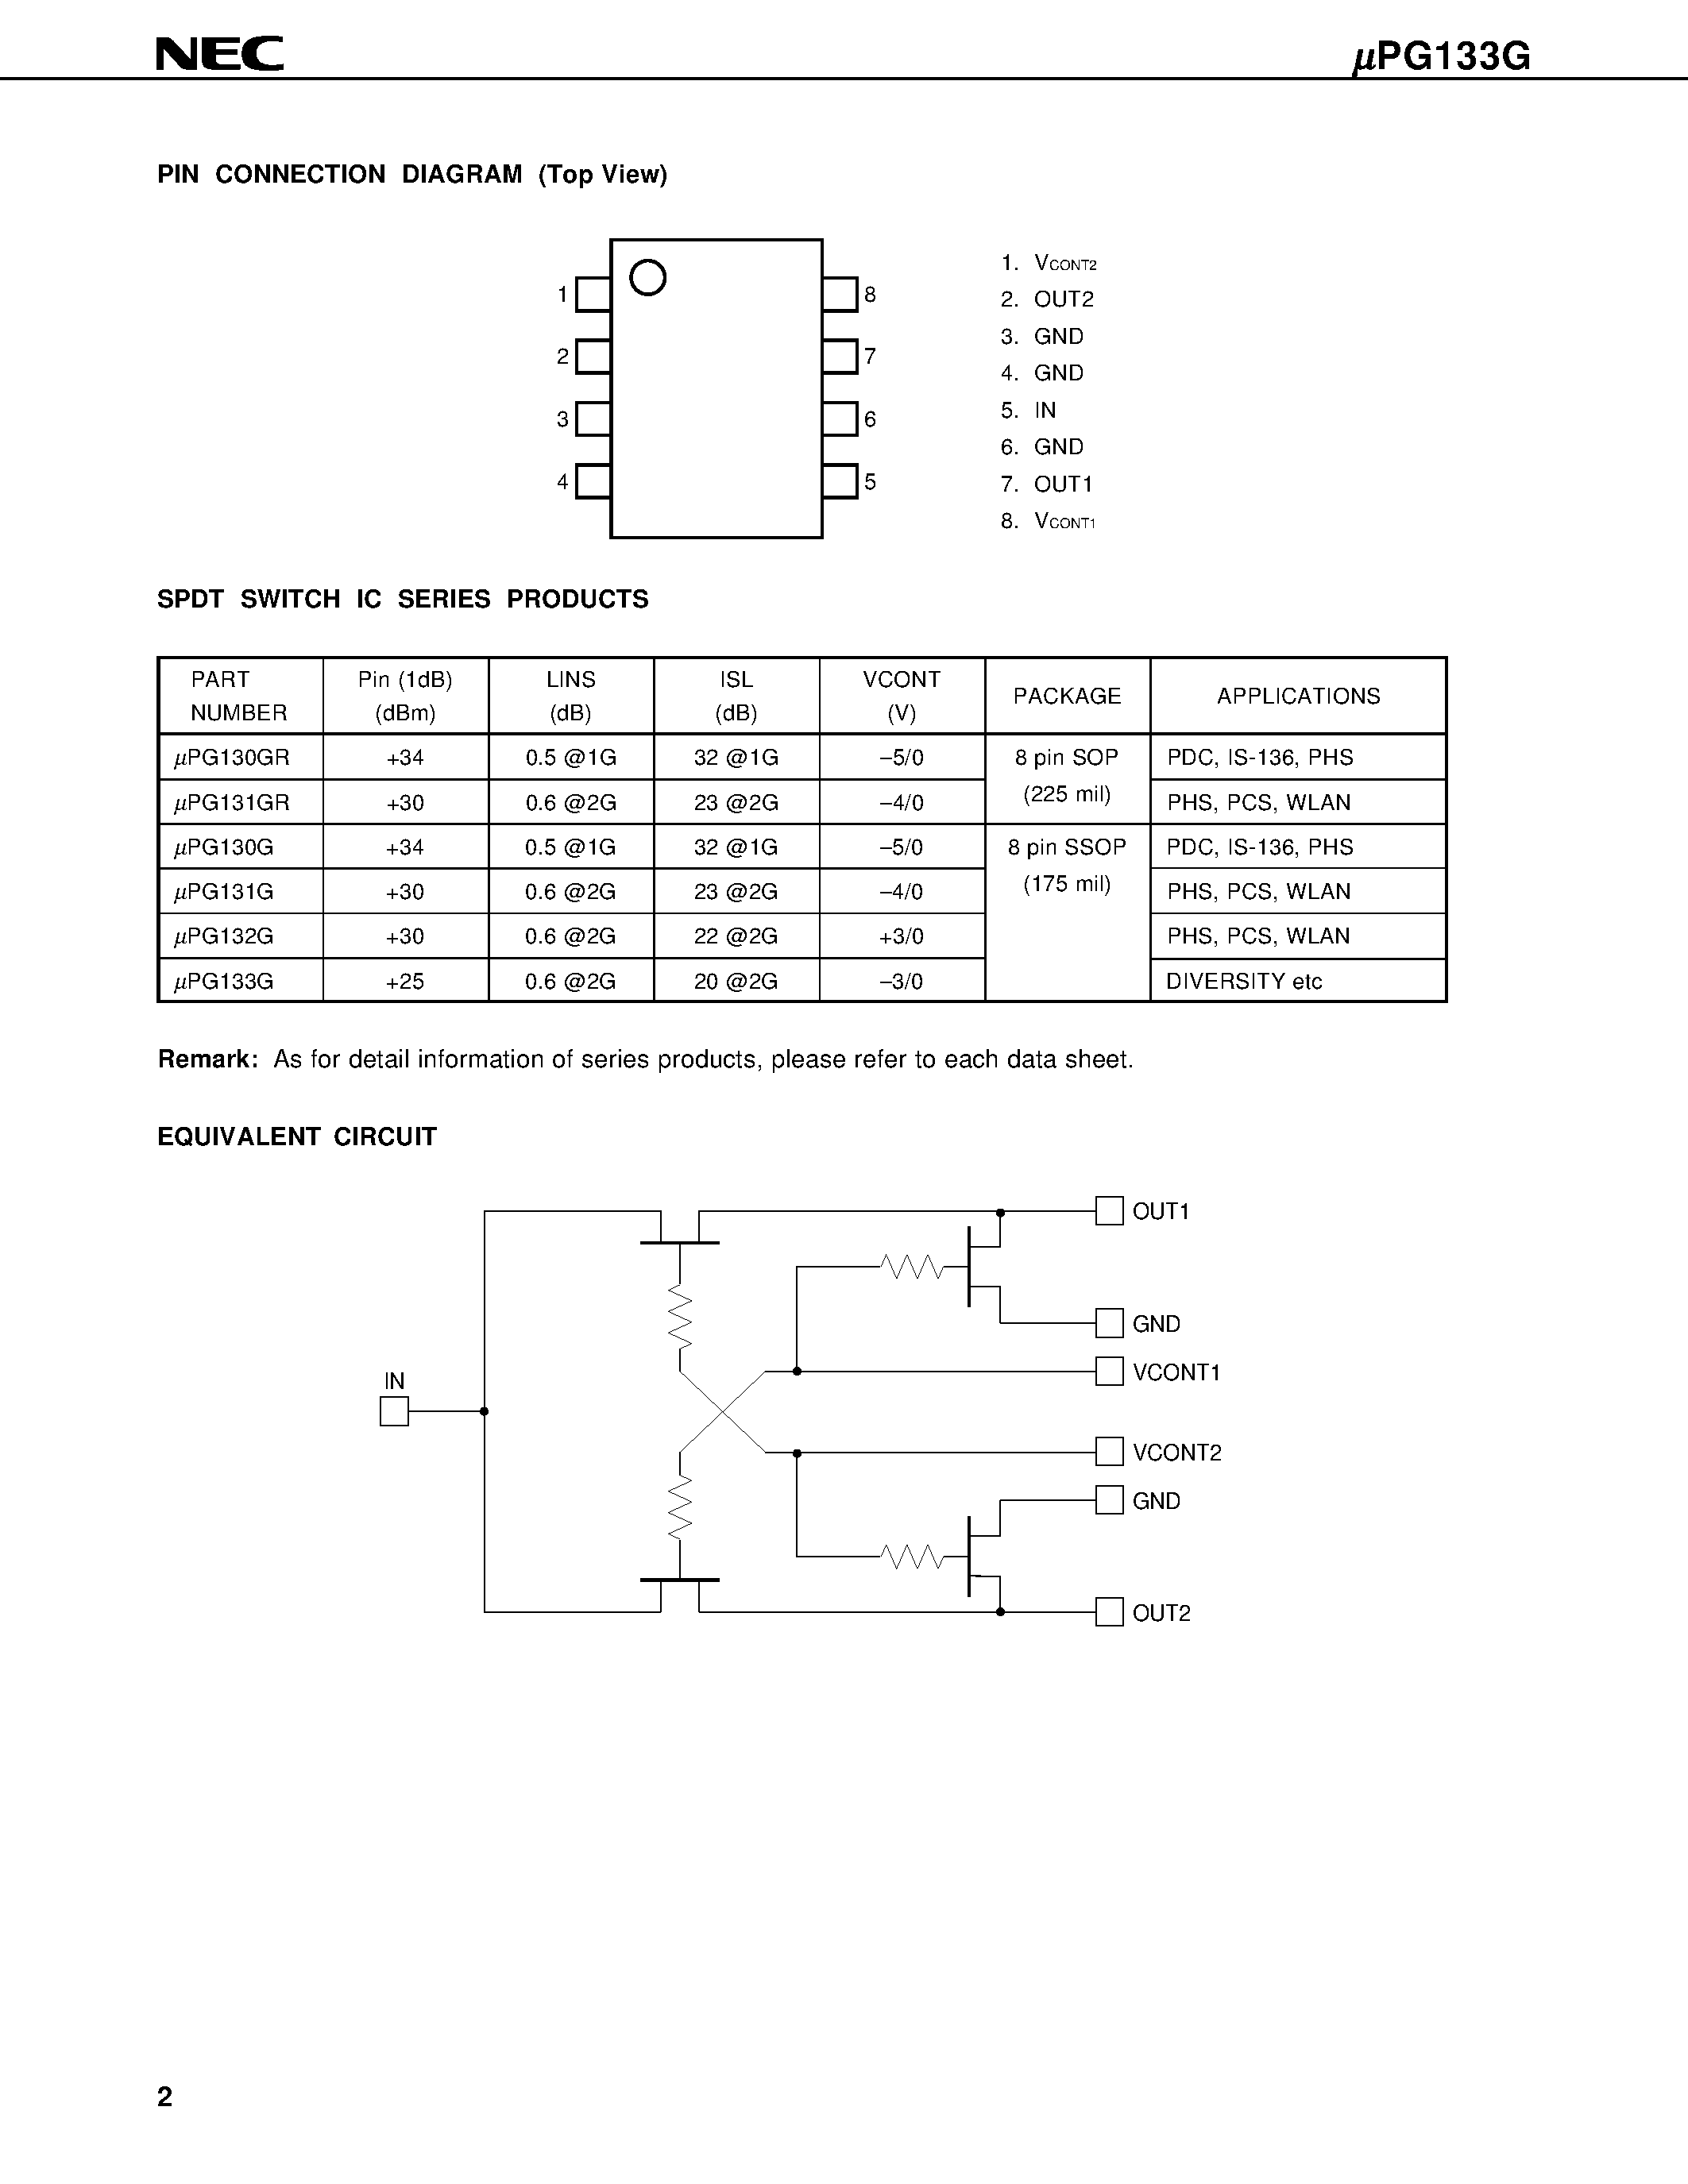 Datasheet UPG133G-E1 - L-BAND SPDT SWITCH page 2